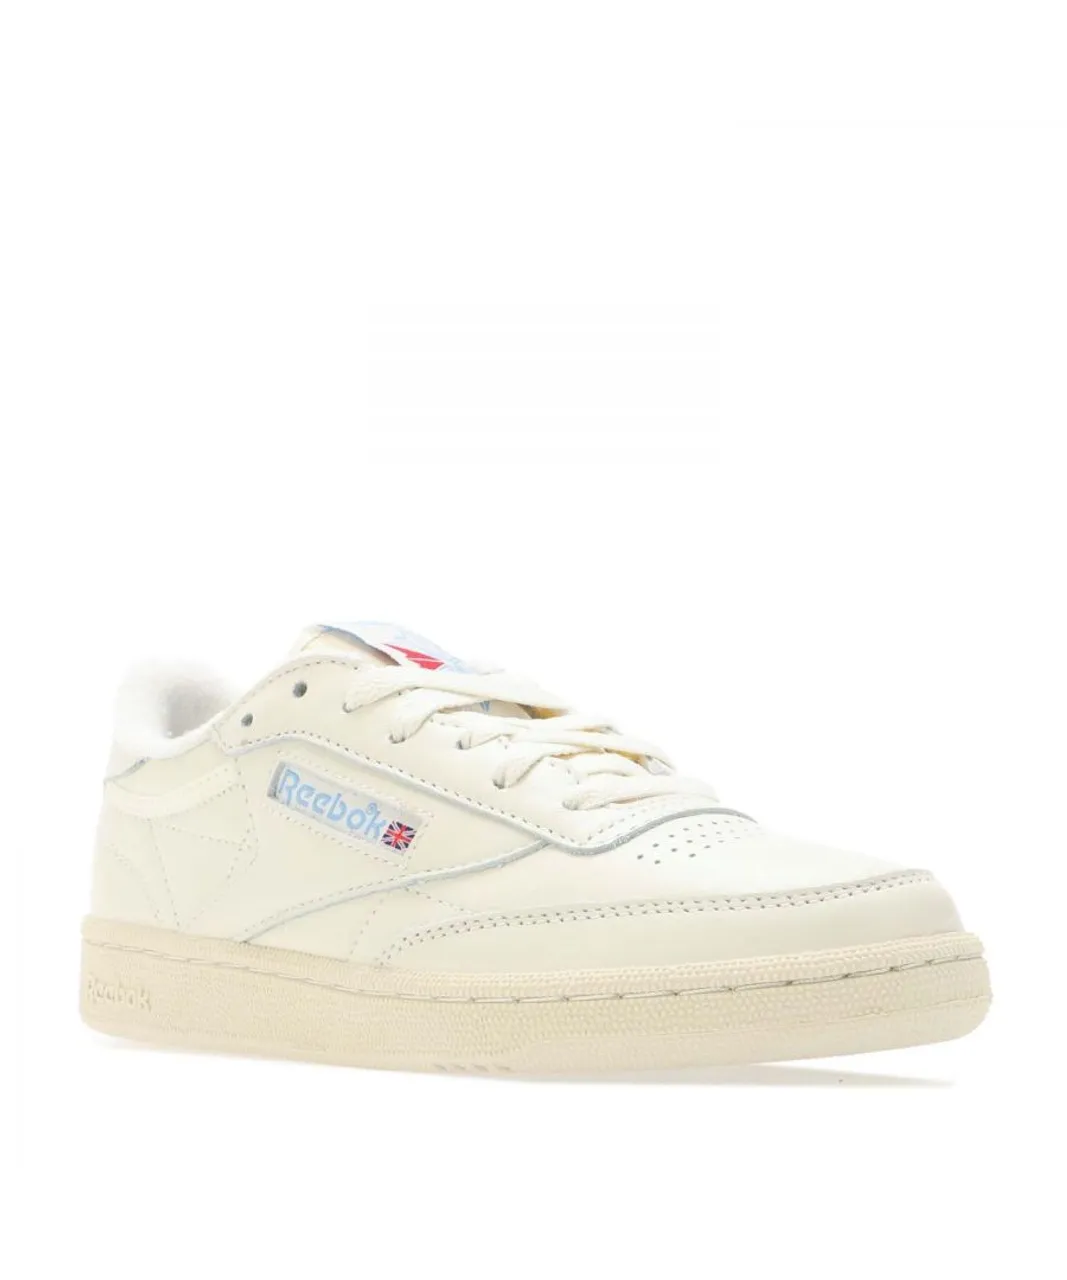 Reebok Womenss Classics Club C 85 Vintage Trainers in White Leather (archived)